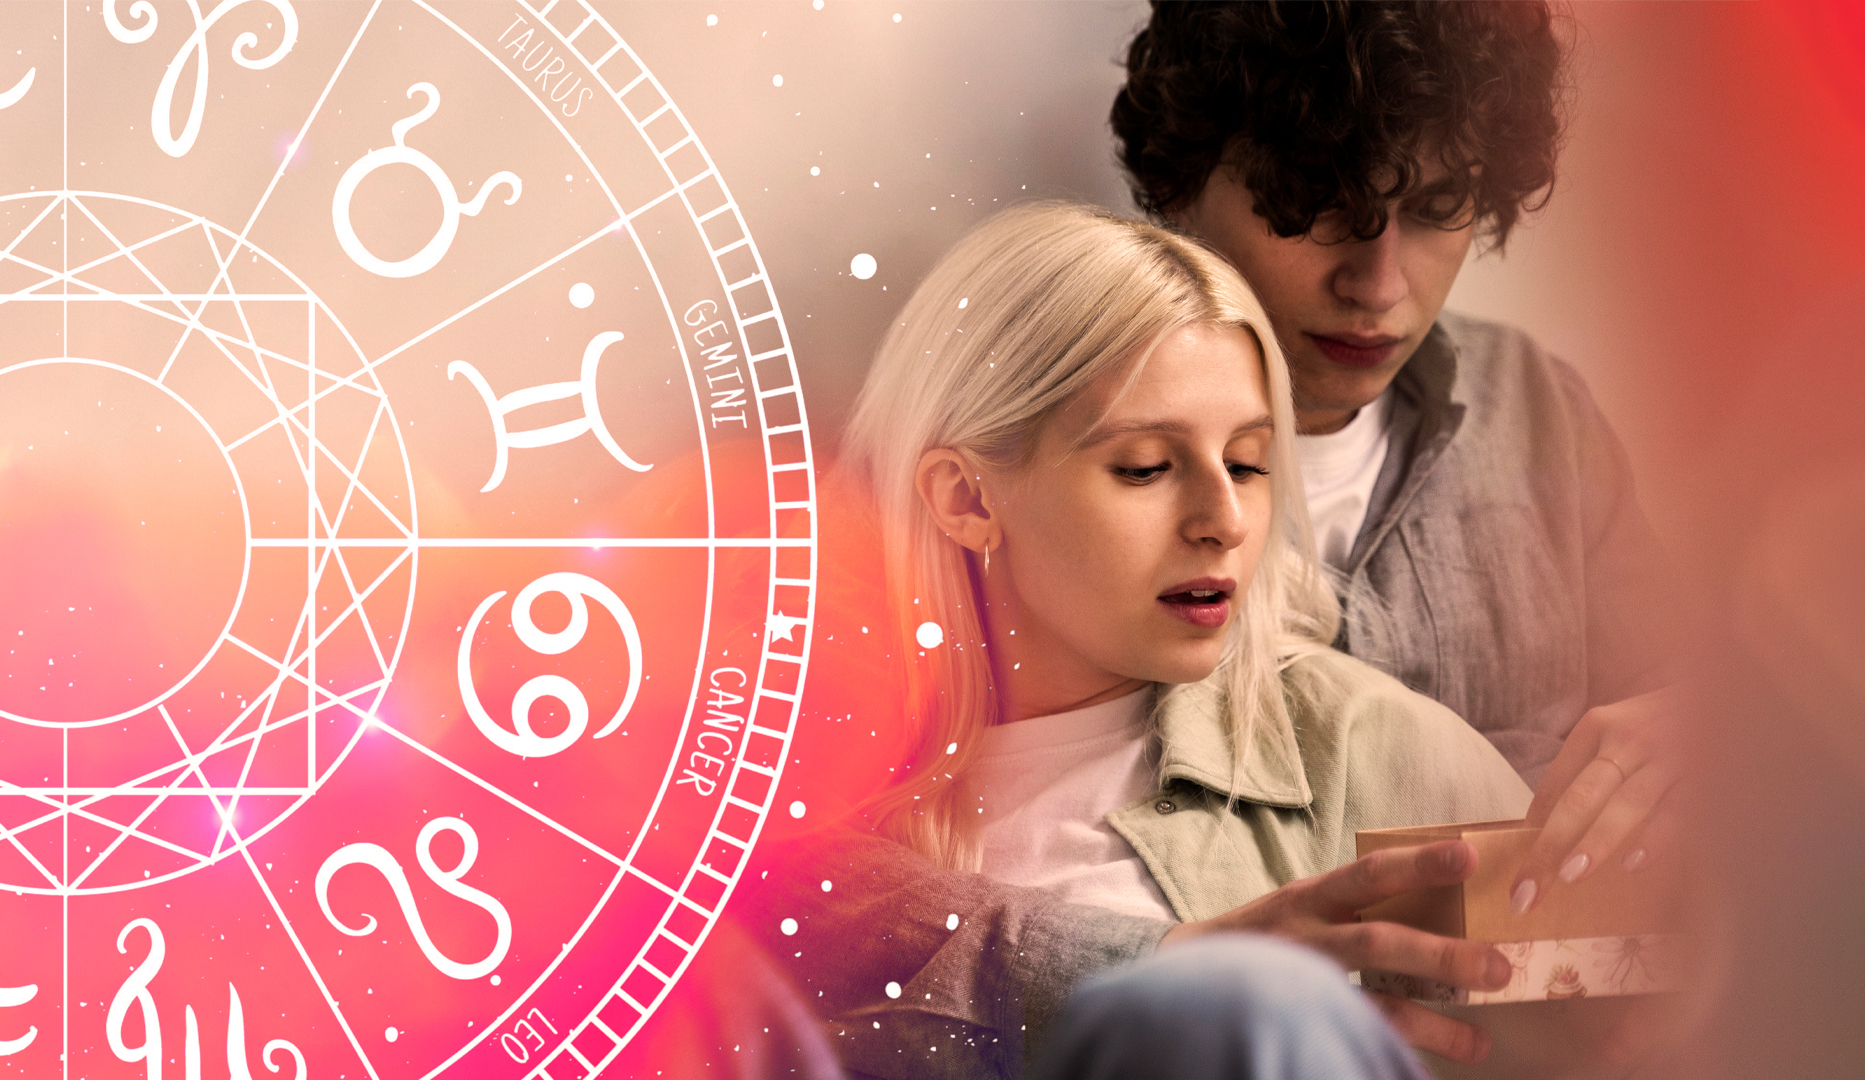 How to get back lost love with astrology